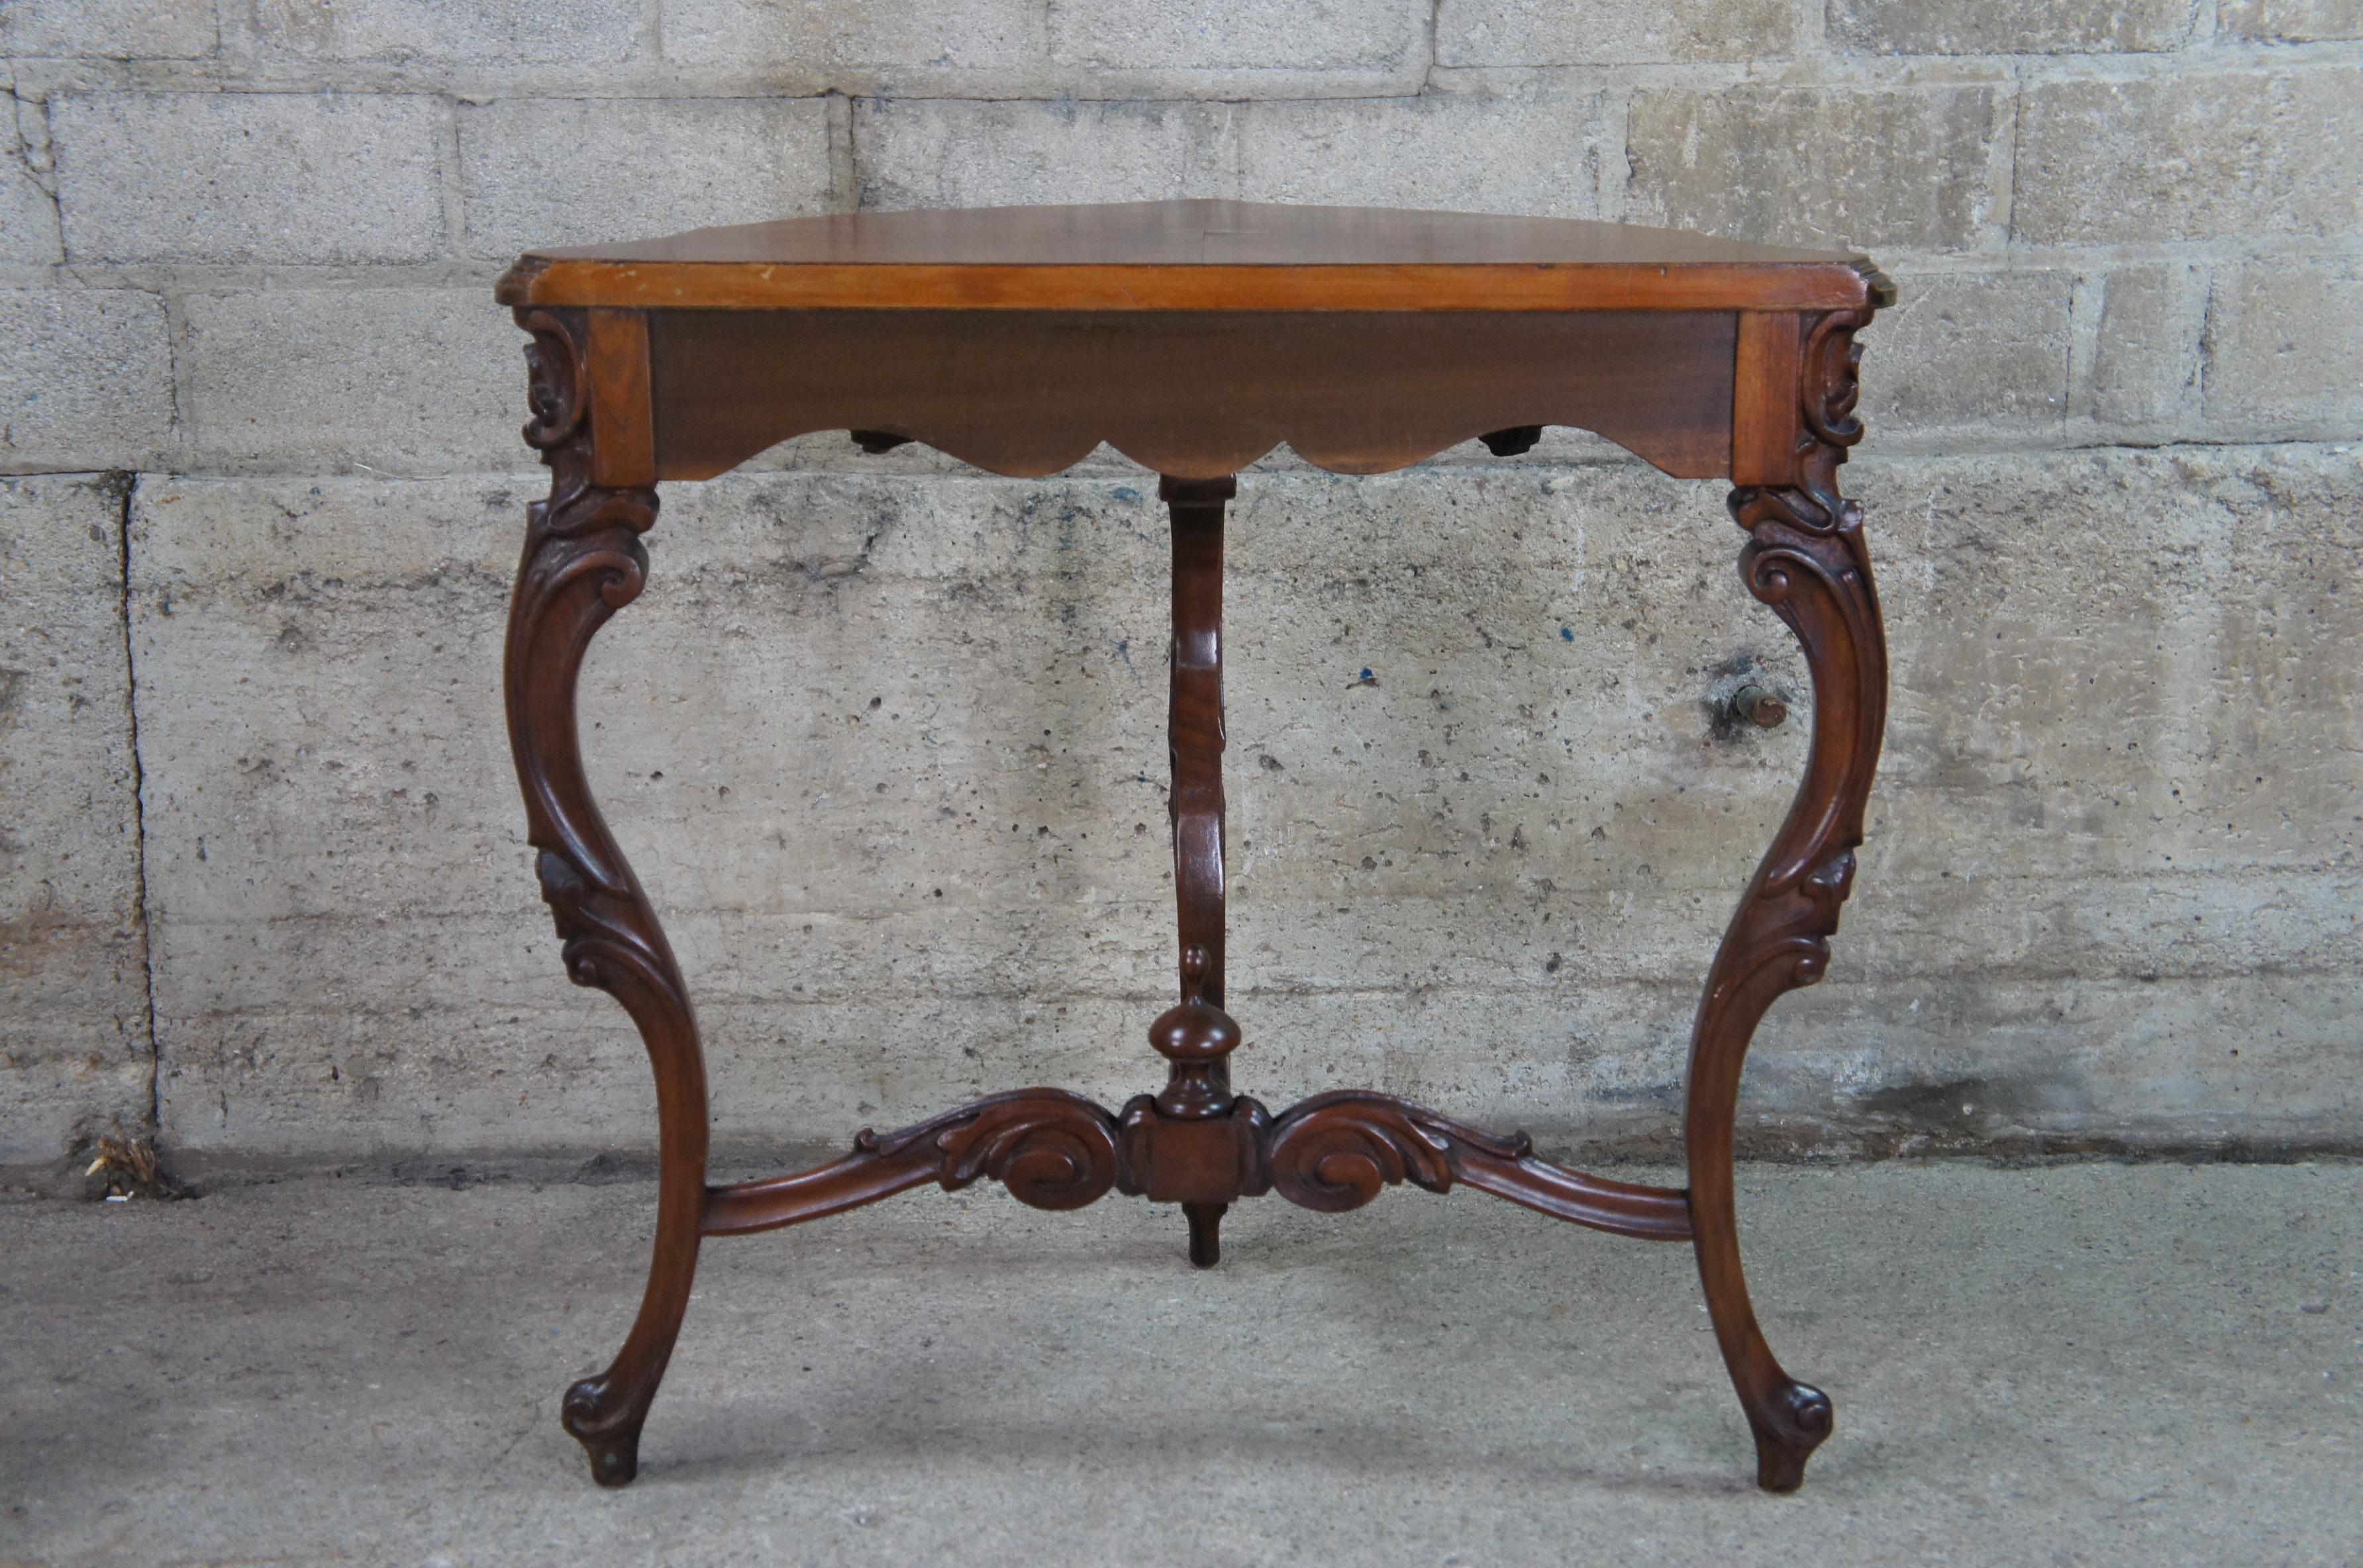 Antique French Baroque Rococo Carved Demilune Walnut Burl Console Hall Table 1